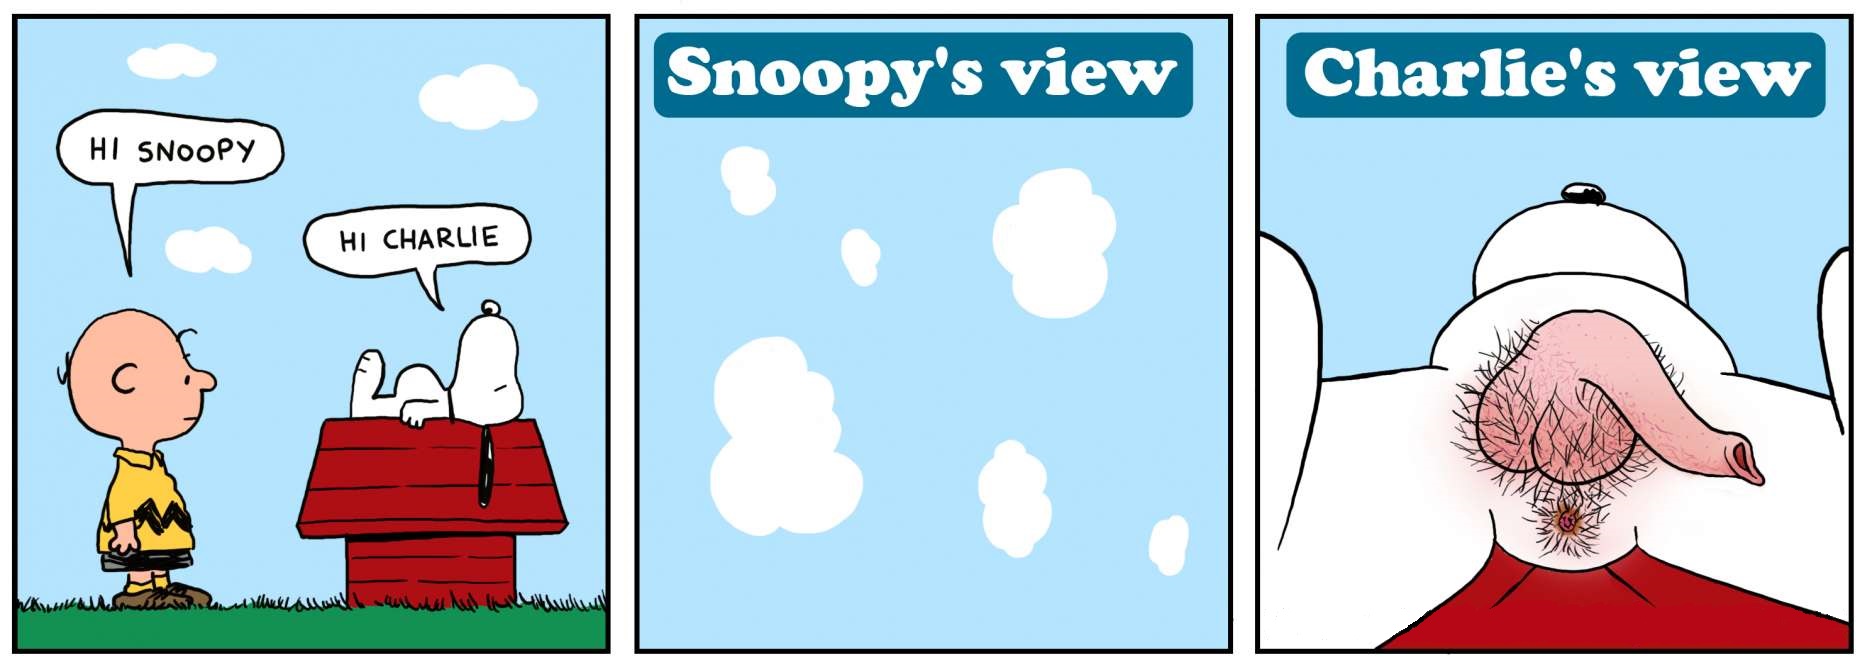 Snoopy’s view vs Charlie’s view